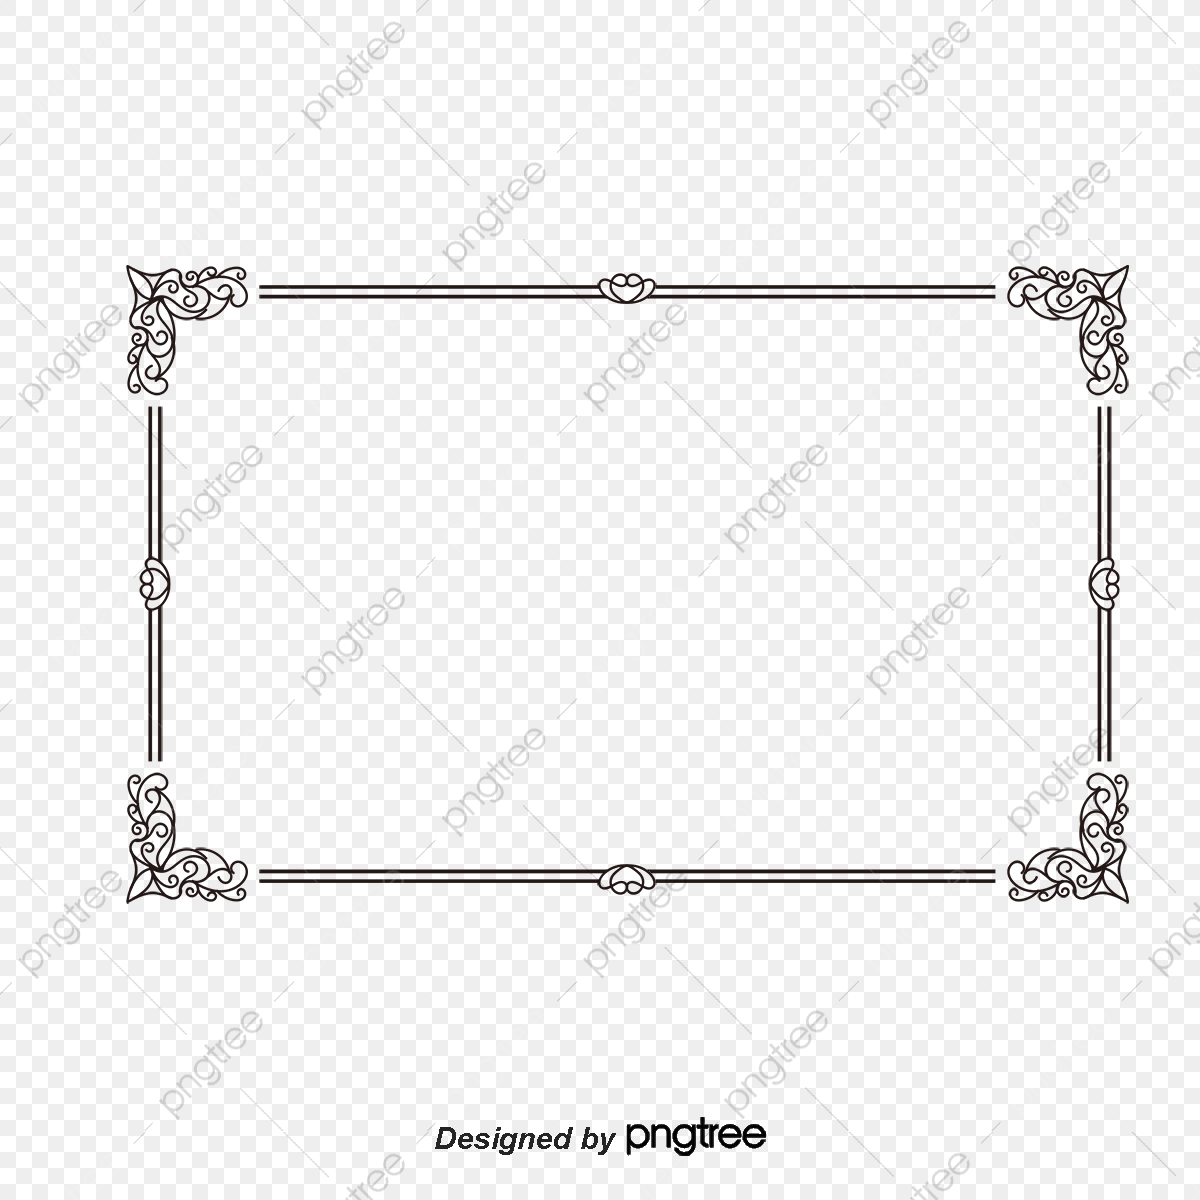 Vector Borders And Frames Free Download at Vectorified.com | Collection ...